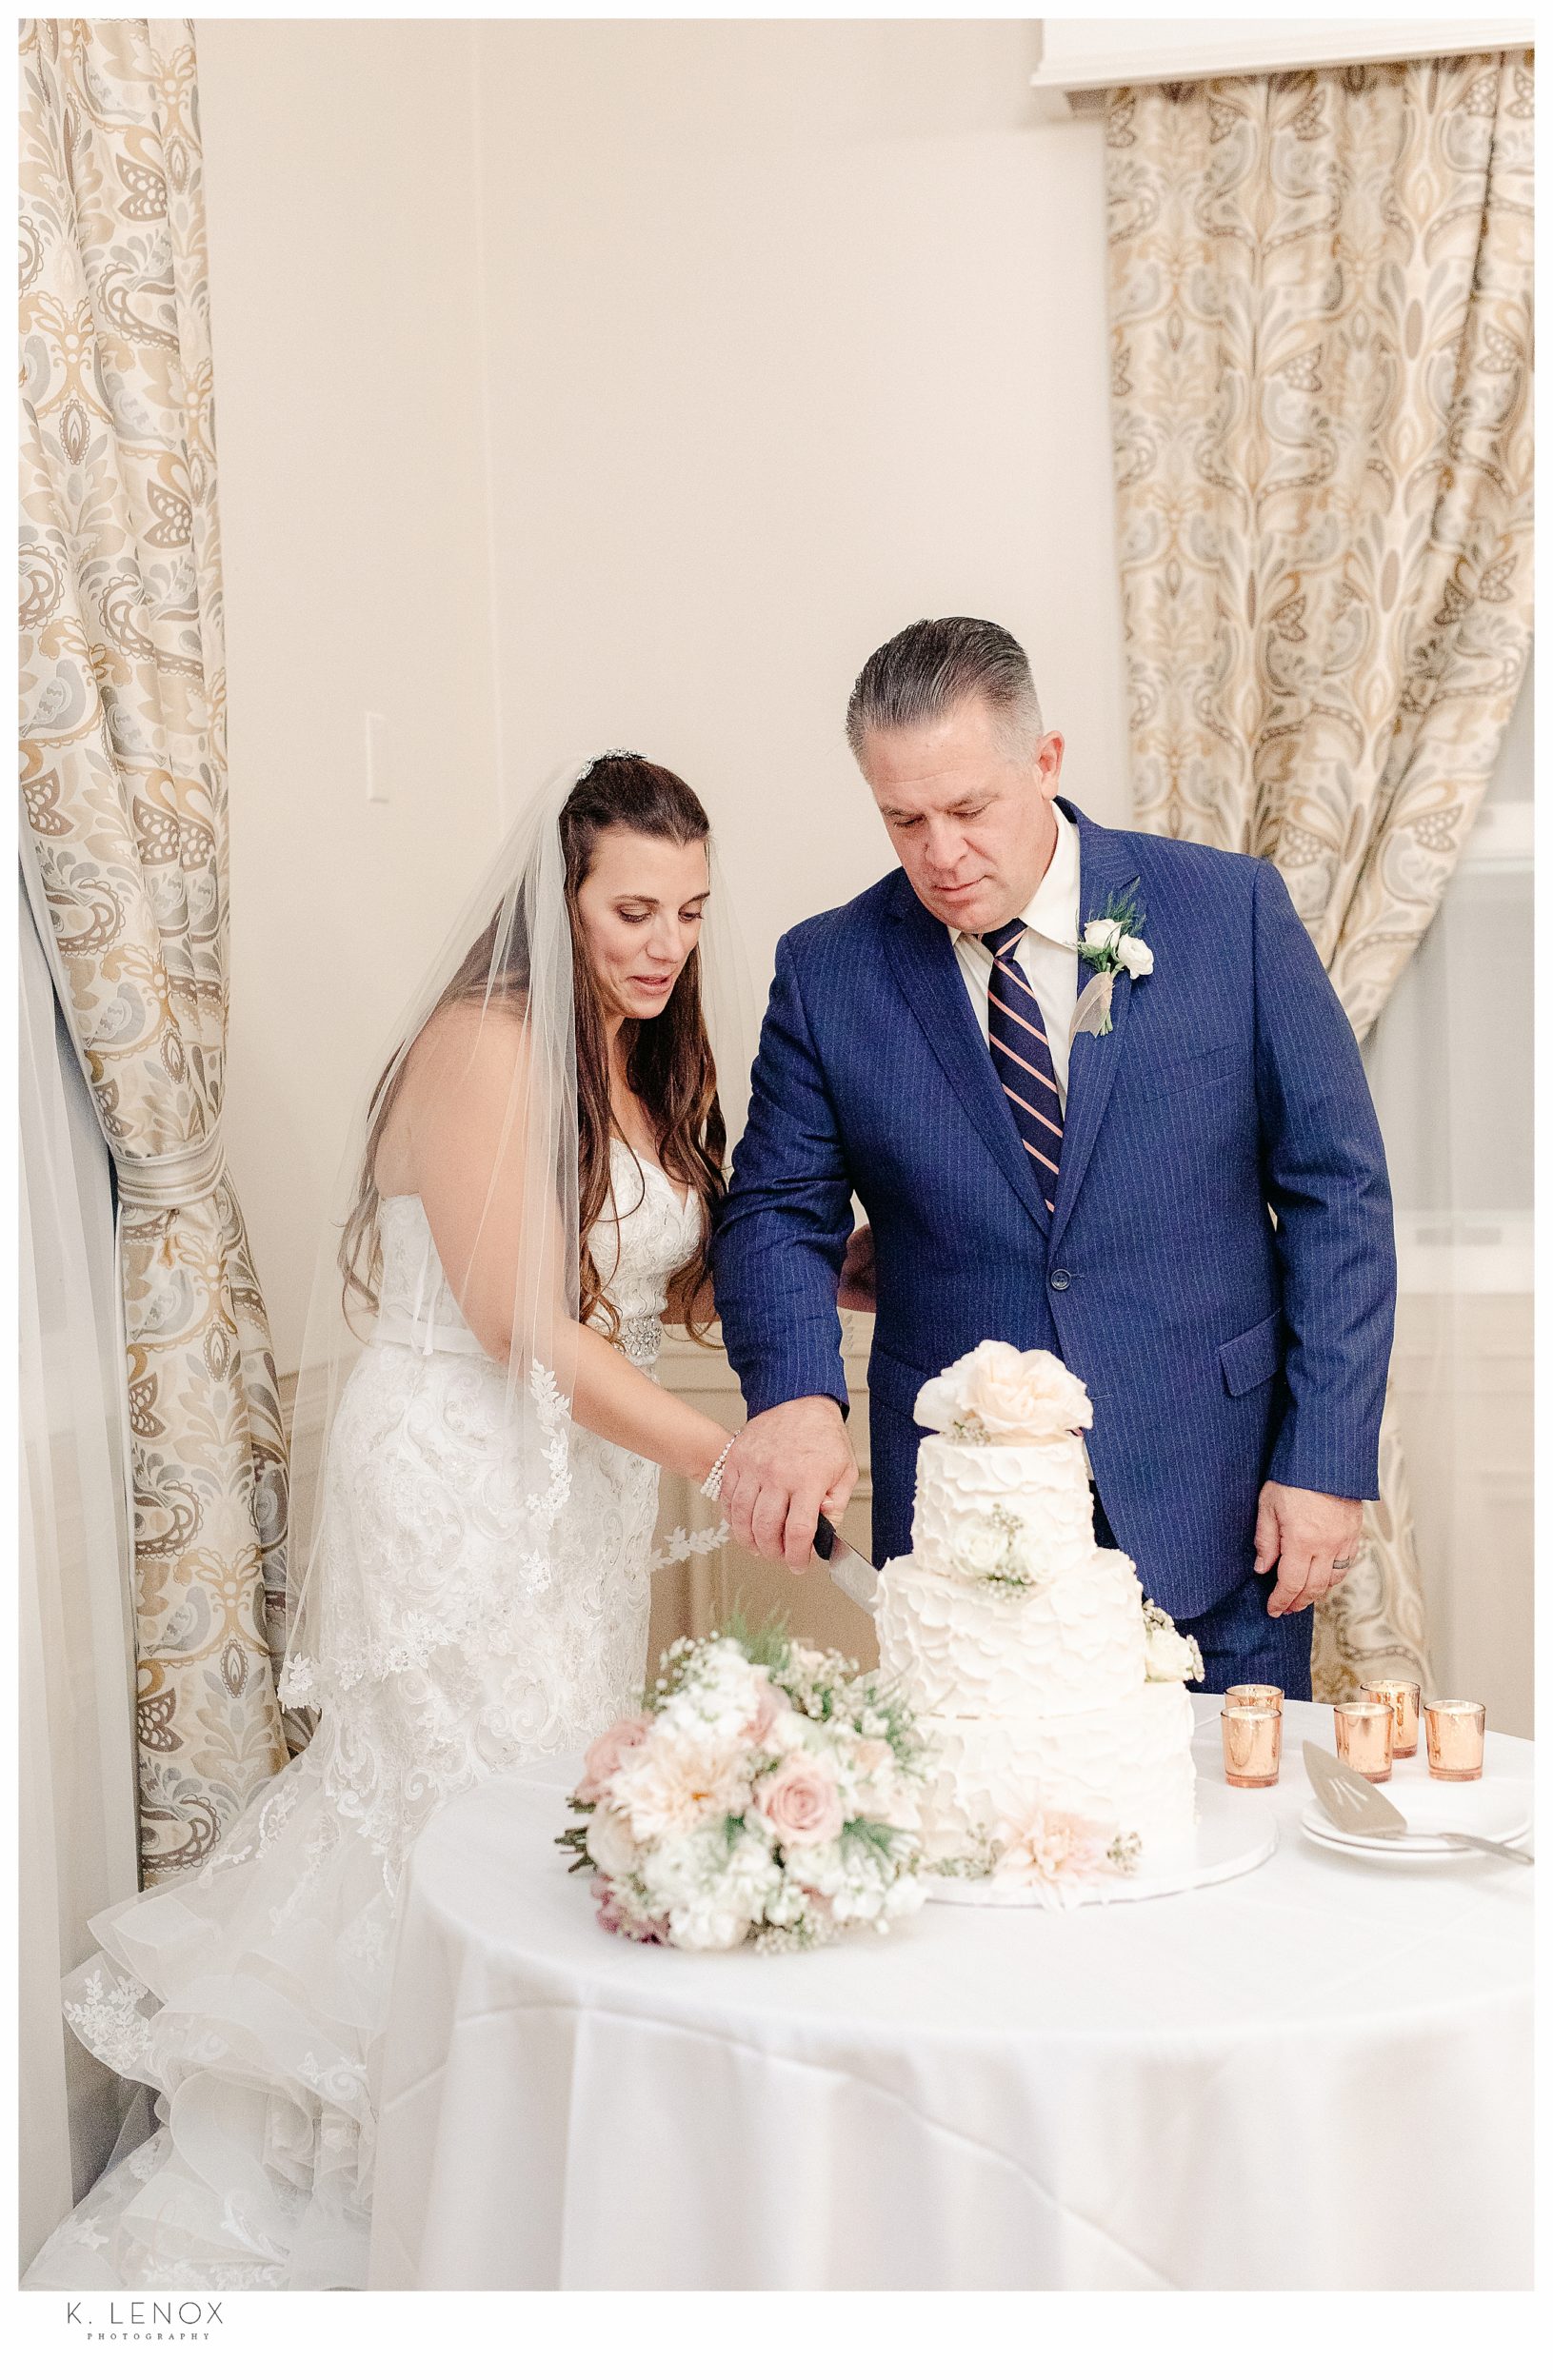 Wedding at the Keene Country Club- Couple Cutting the cake